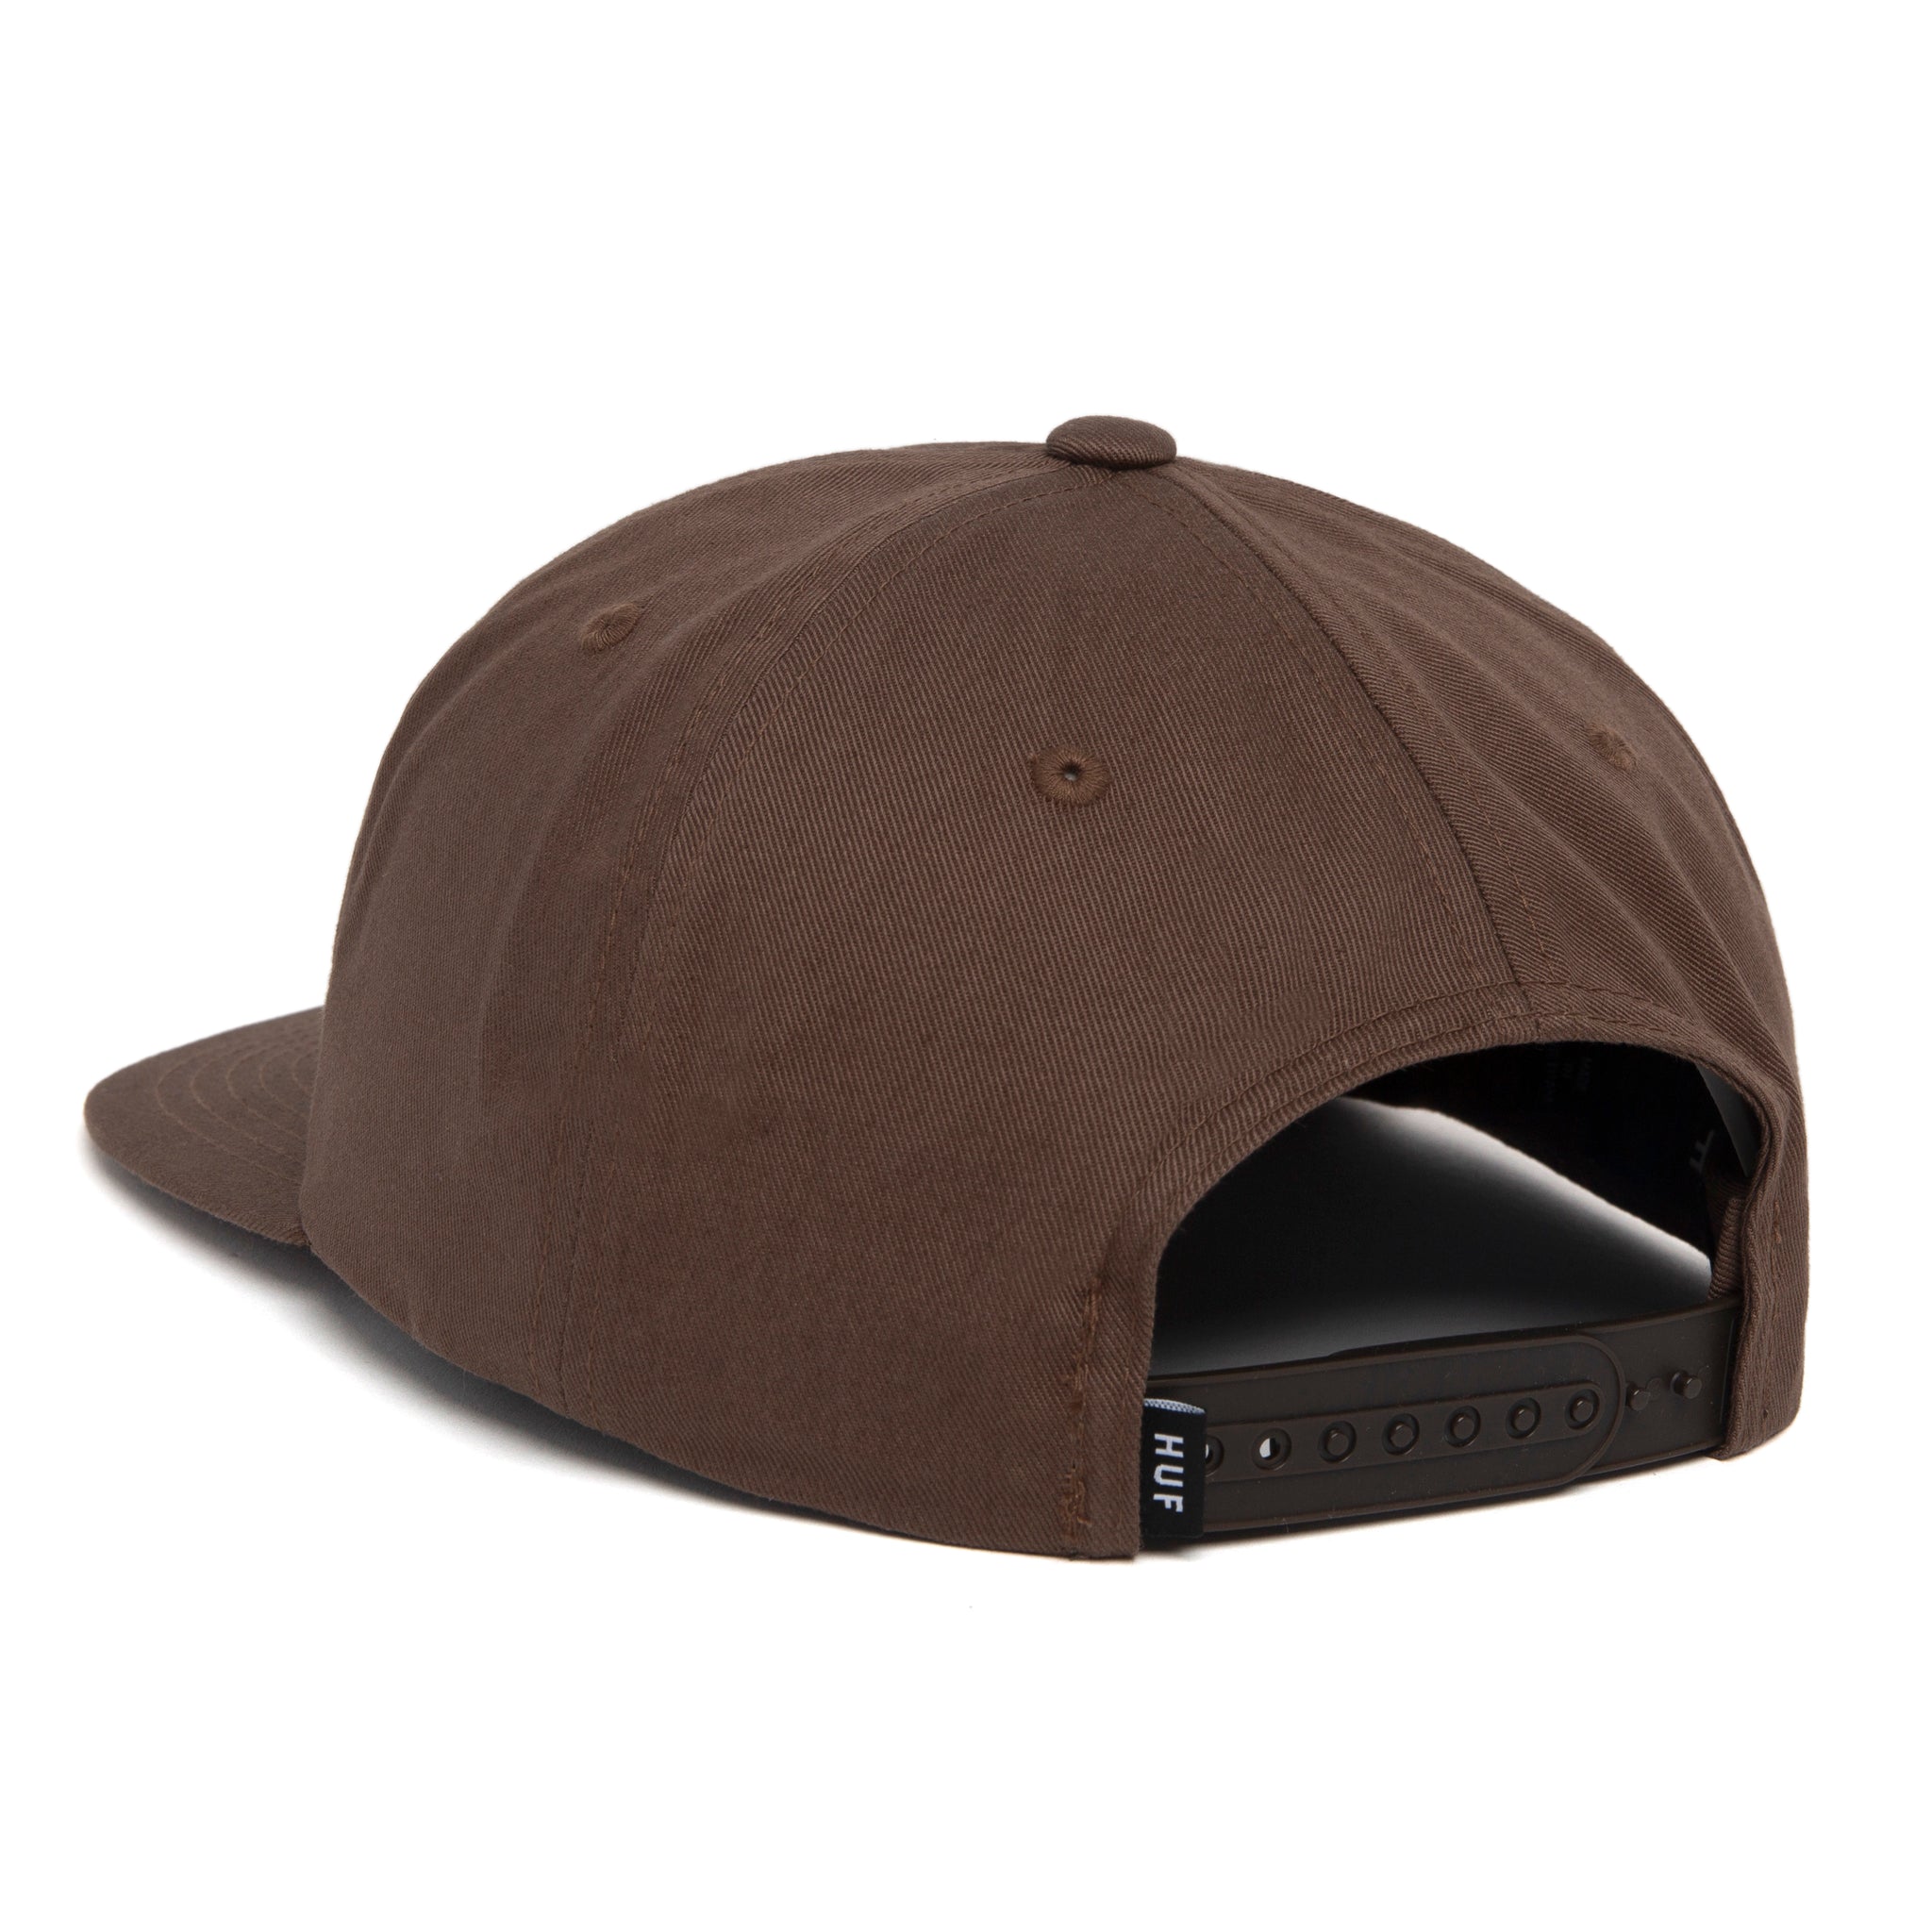 CAP HUF ESS UNSTRUCTURED BOX SNAPBACK BROWN